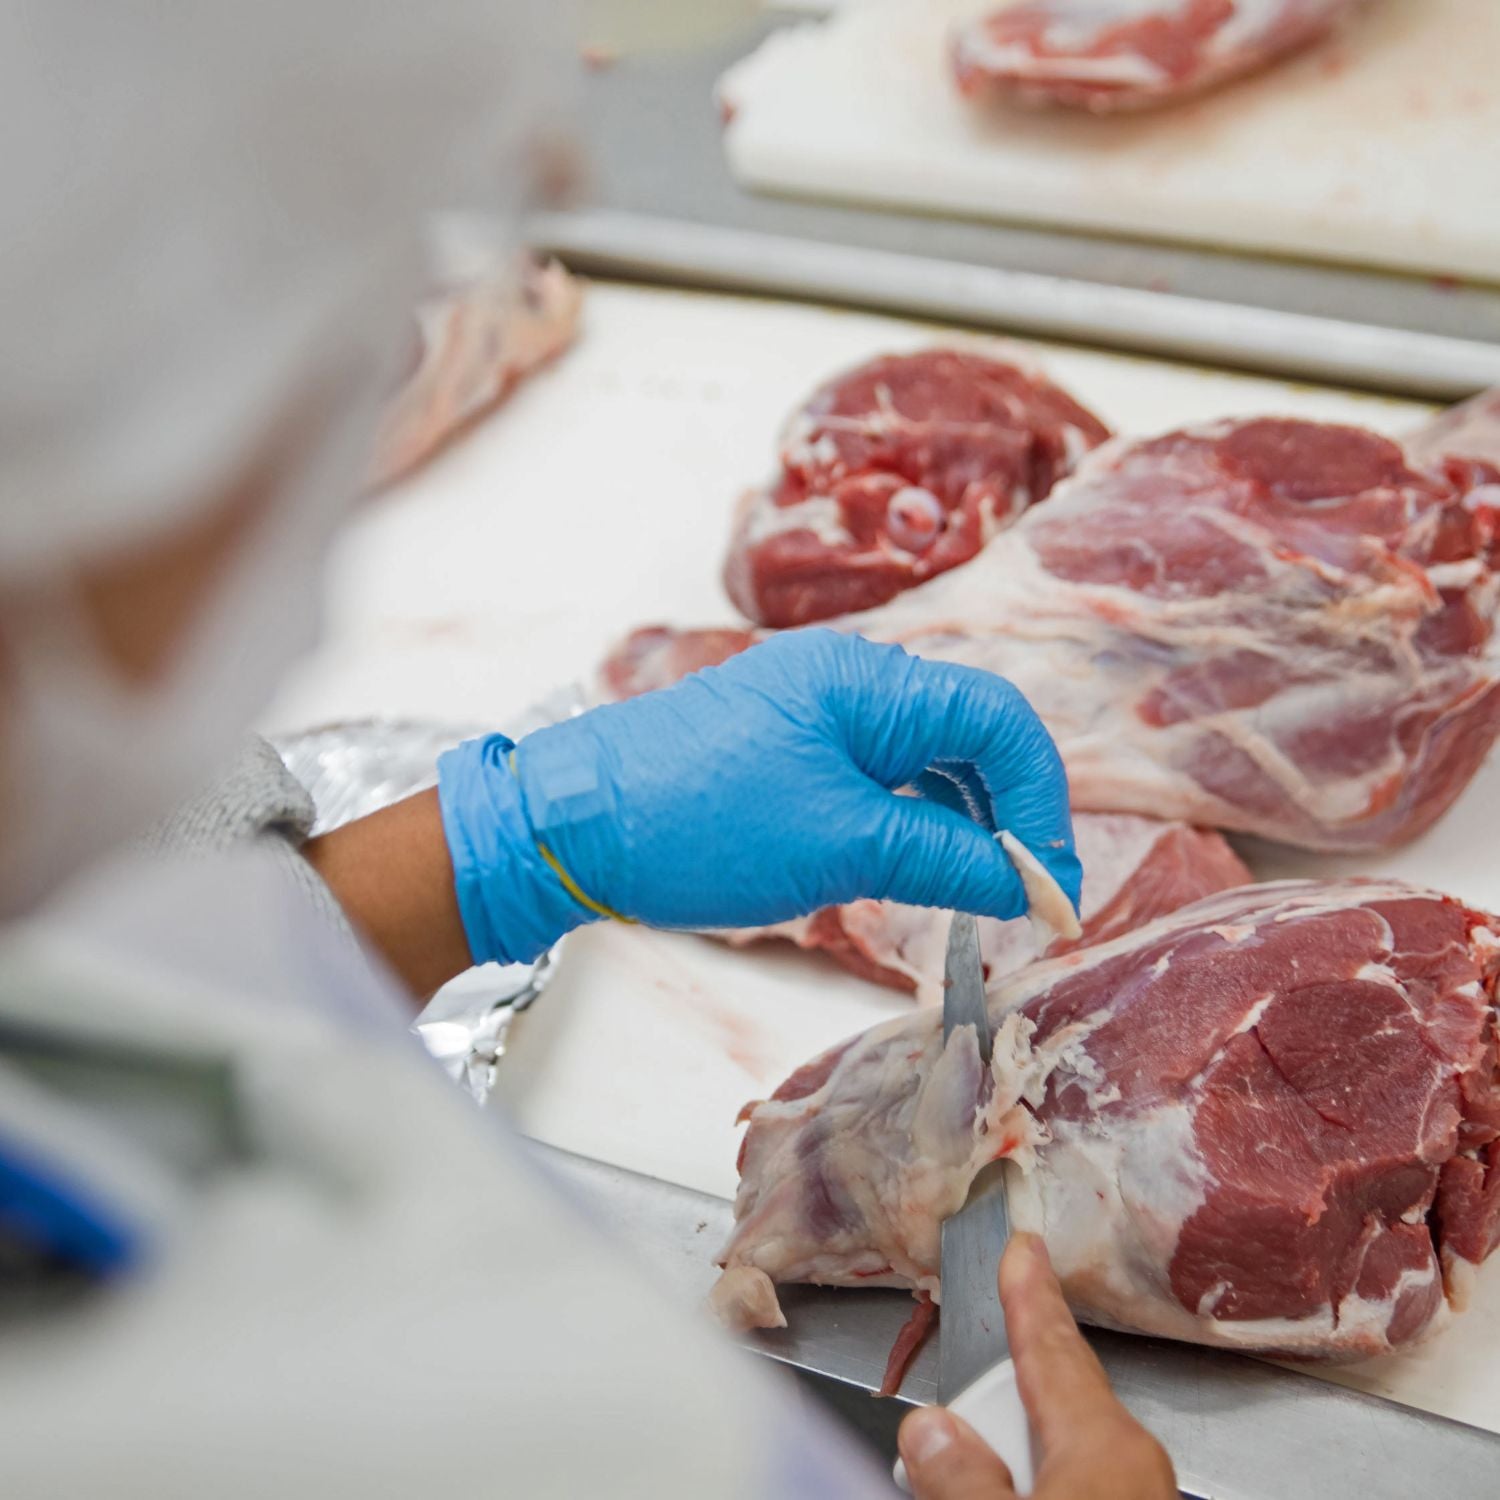 Meat Industry Meat King Standards Quality, Safety and Traceability